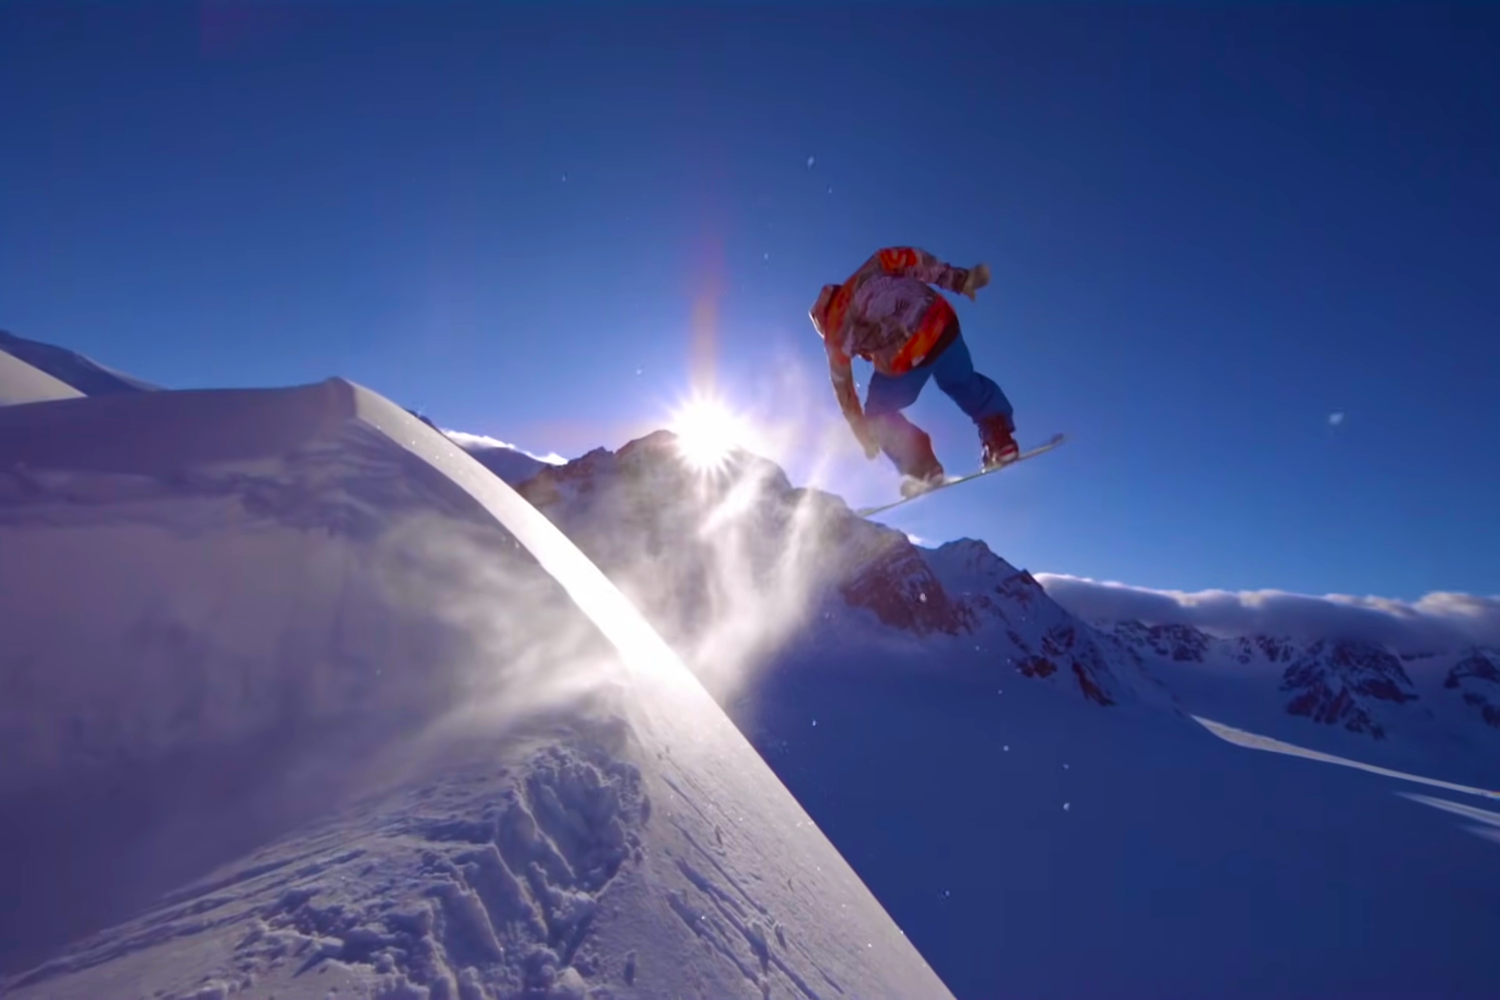 The 9 Best Snowboarding Movies and Documentaries to Add to Your 2022